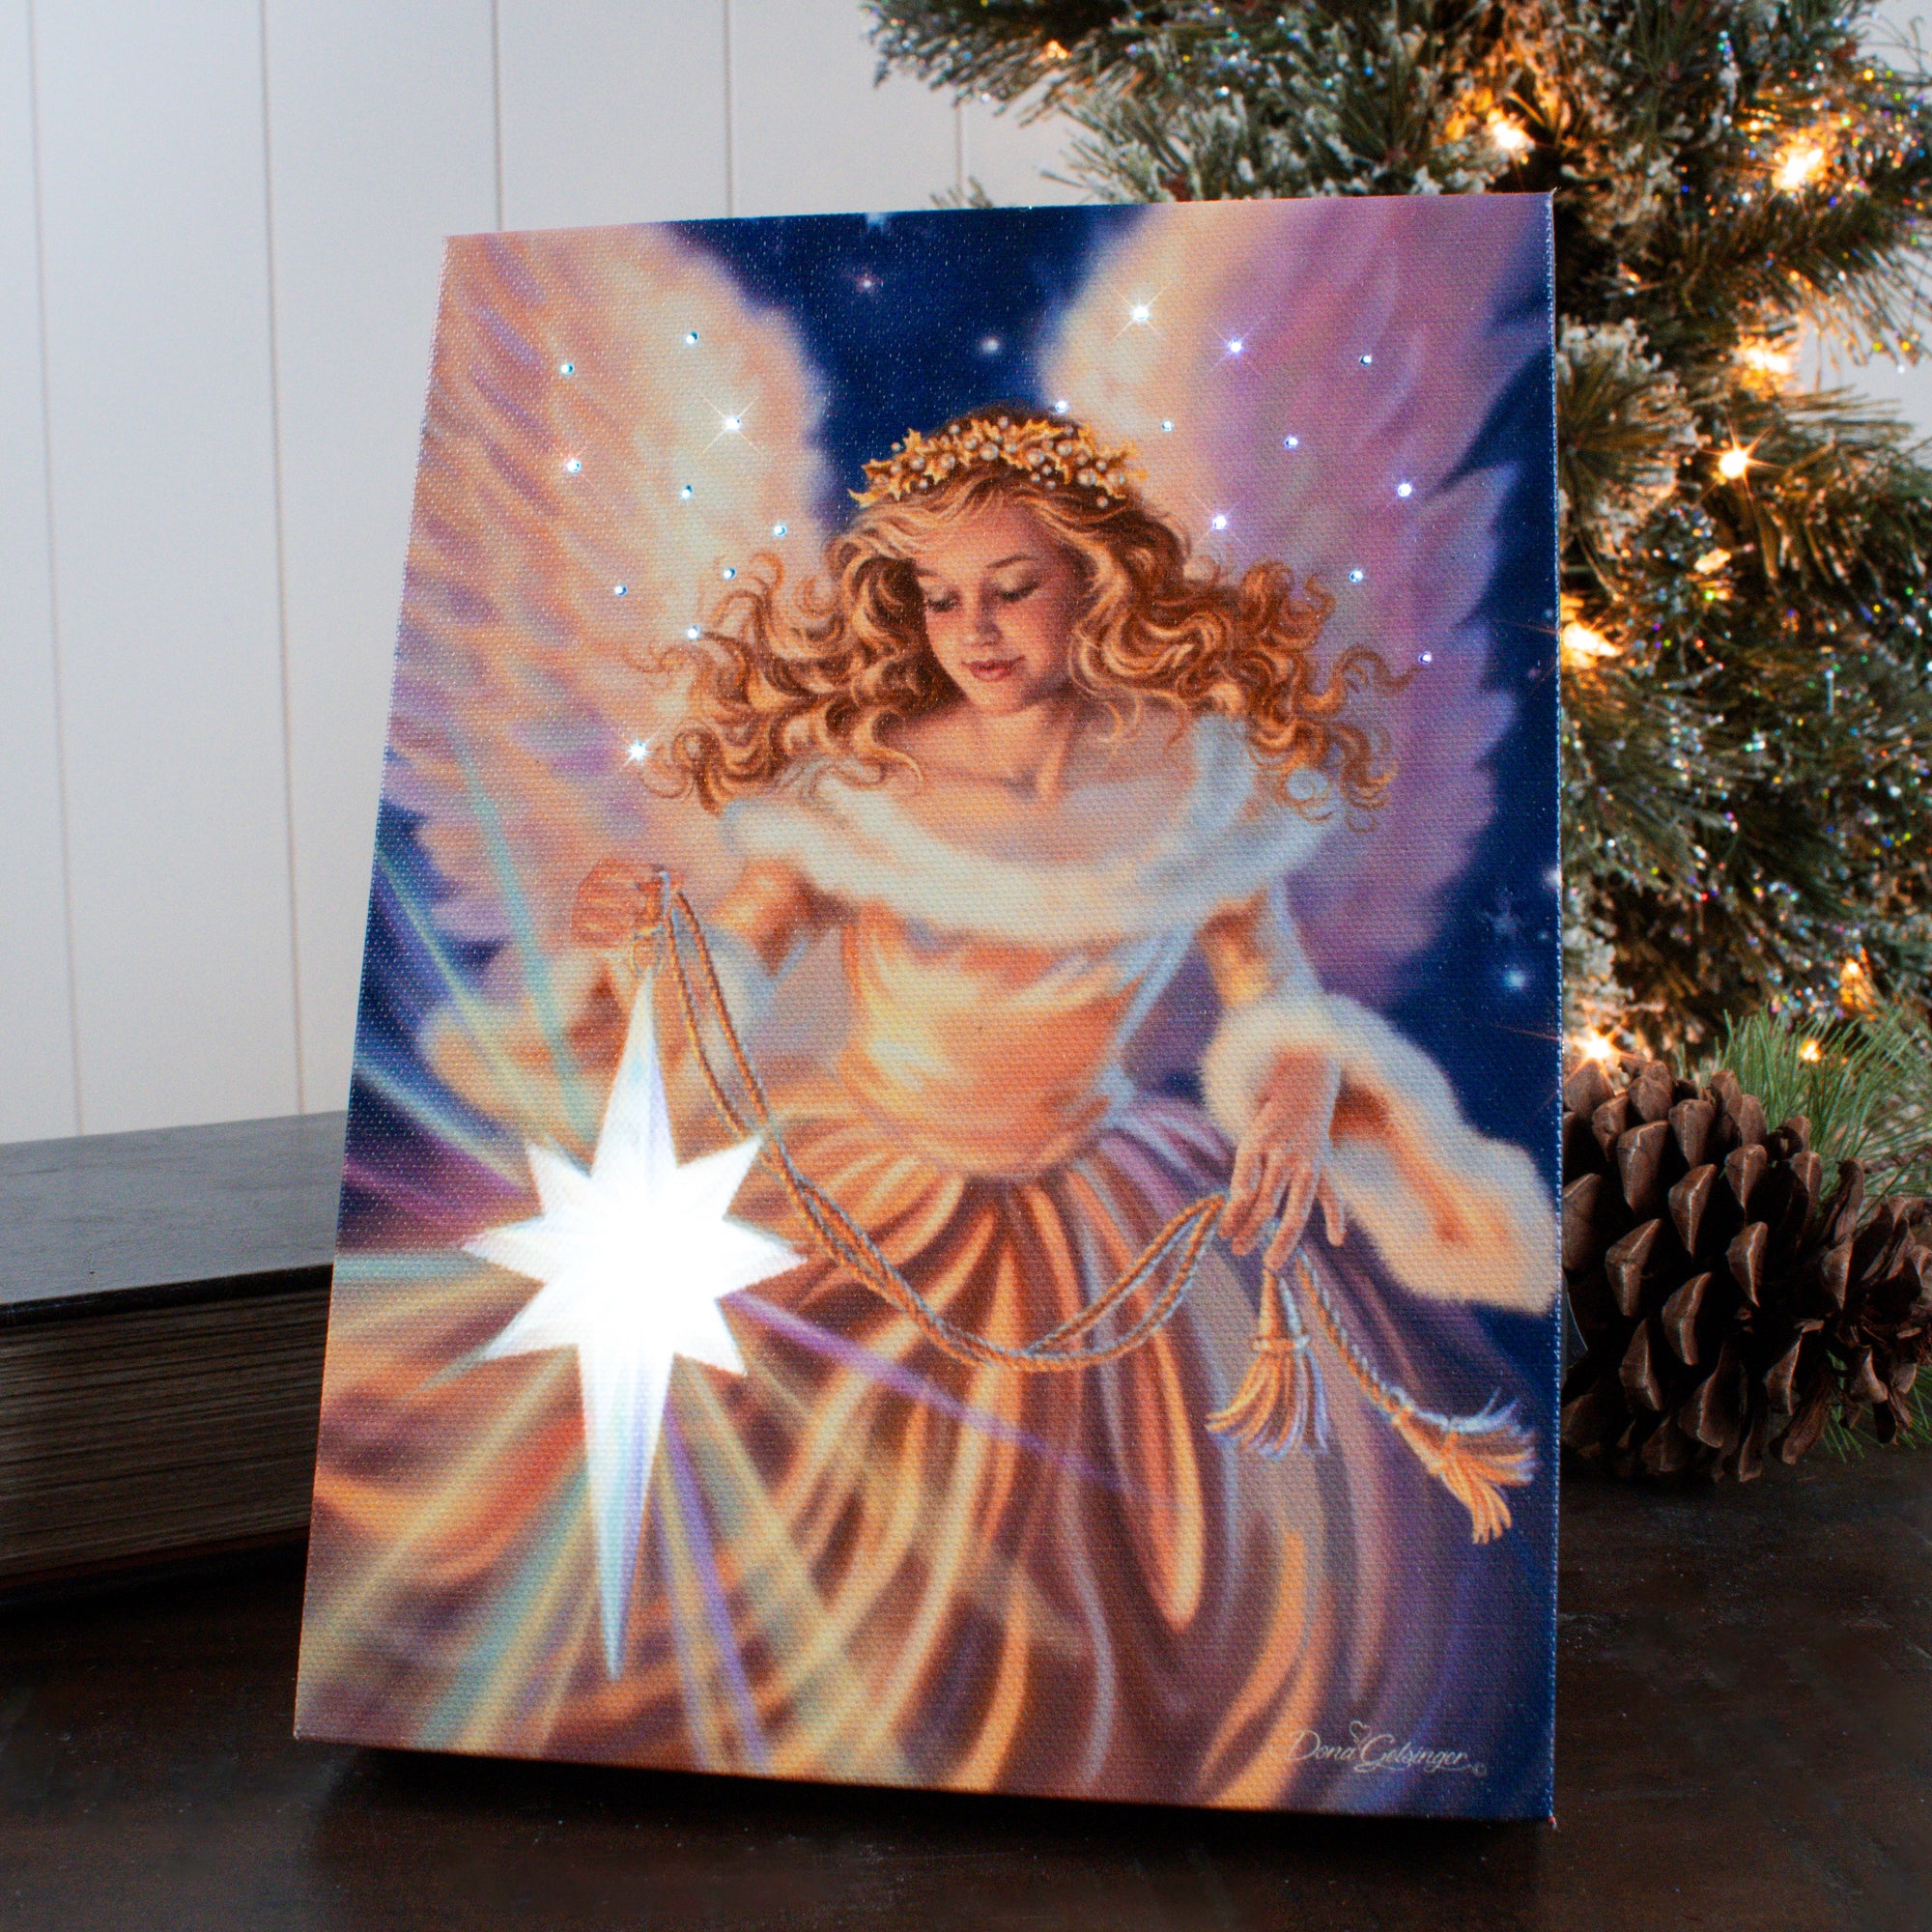 Light of the World 8x6 Lighted Tabletop Canvas